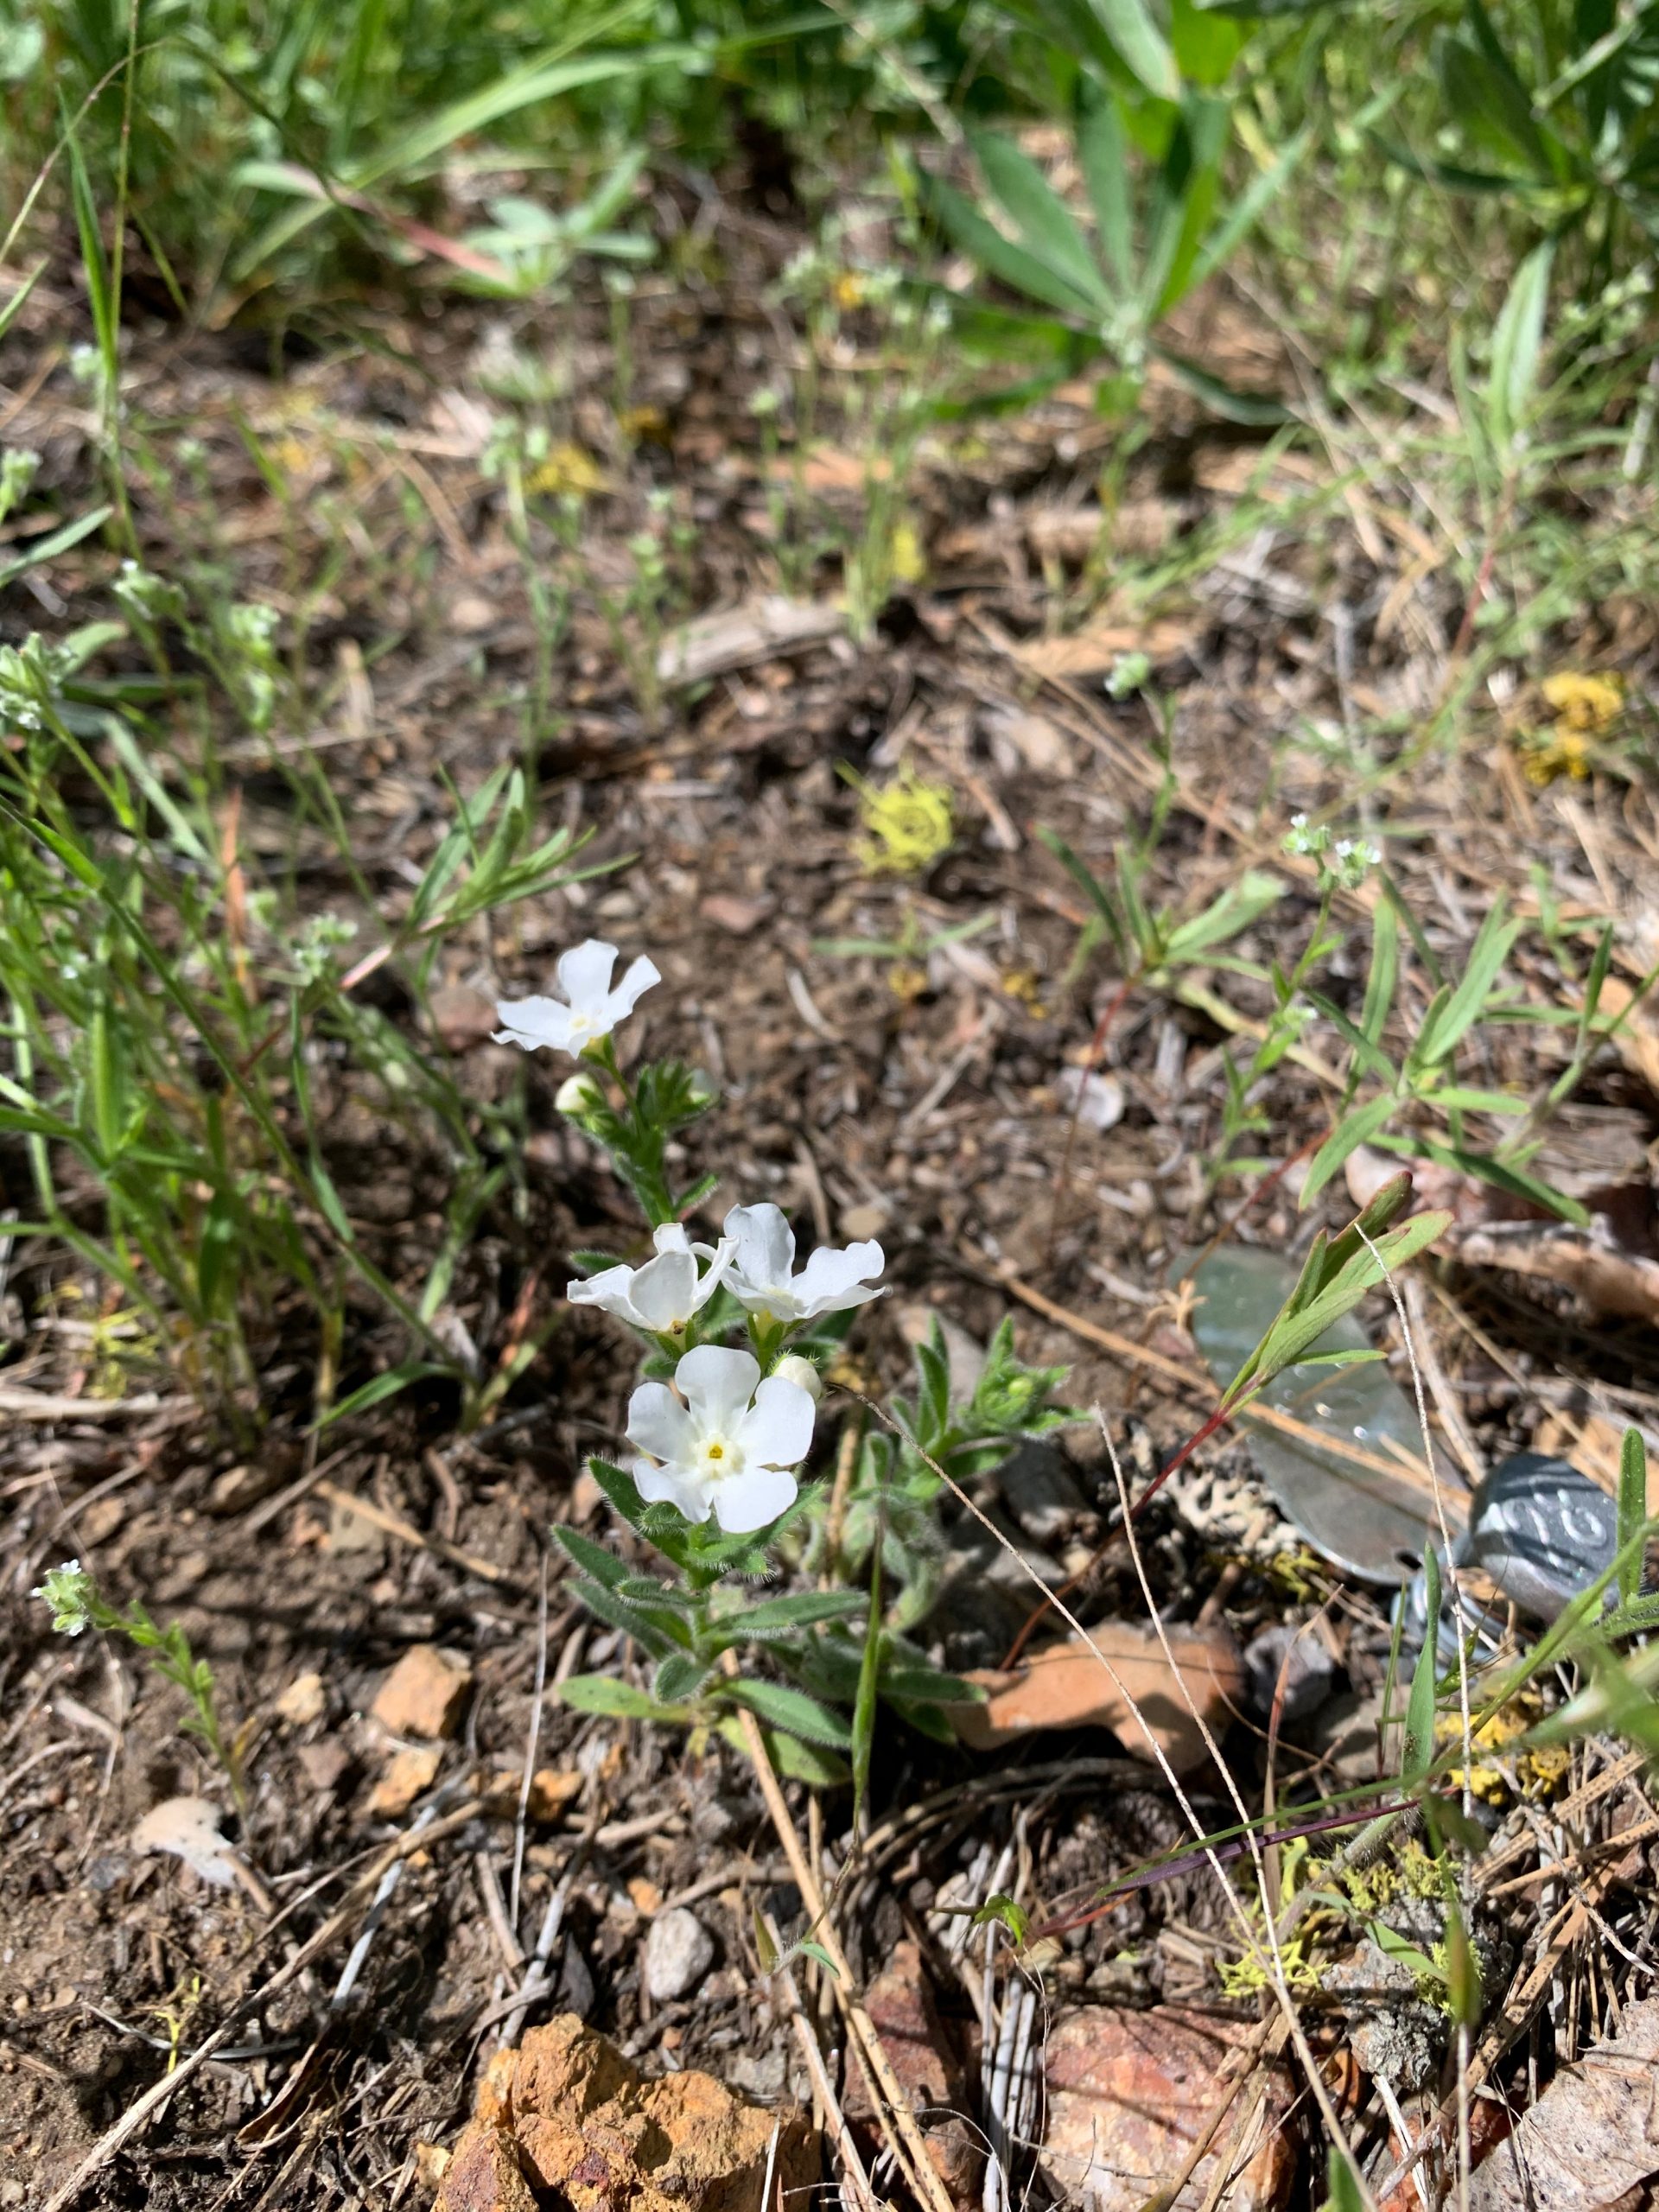 This showy stickseed (Hackelia venusta), survived its first winter, having been planted by Rare Care in the fall of 2019 as part of a reintroduction of the endangered species. The plant survived to flower this spring.